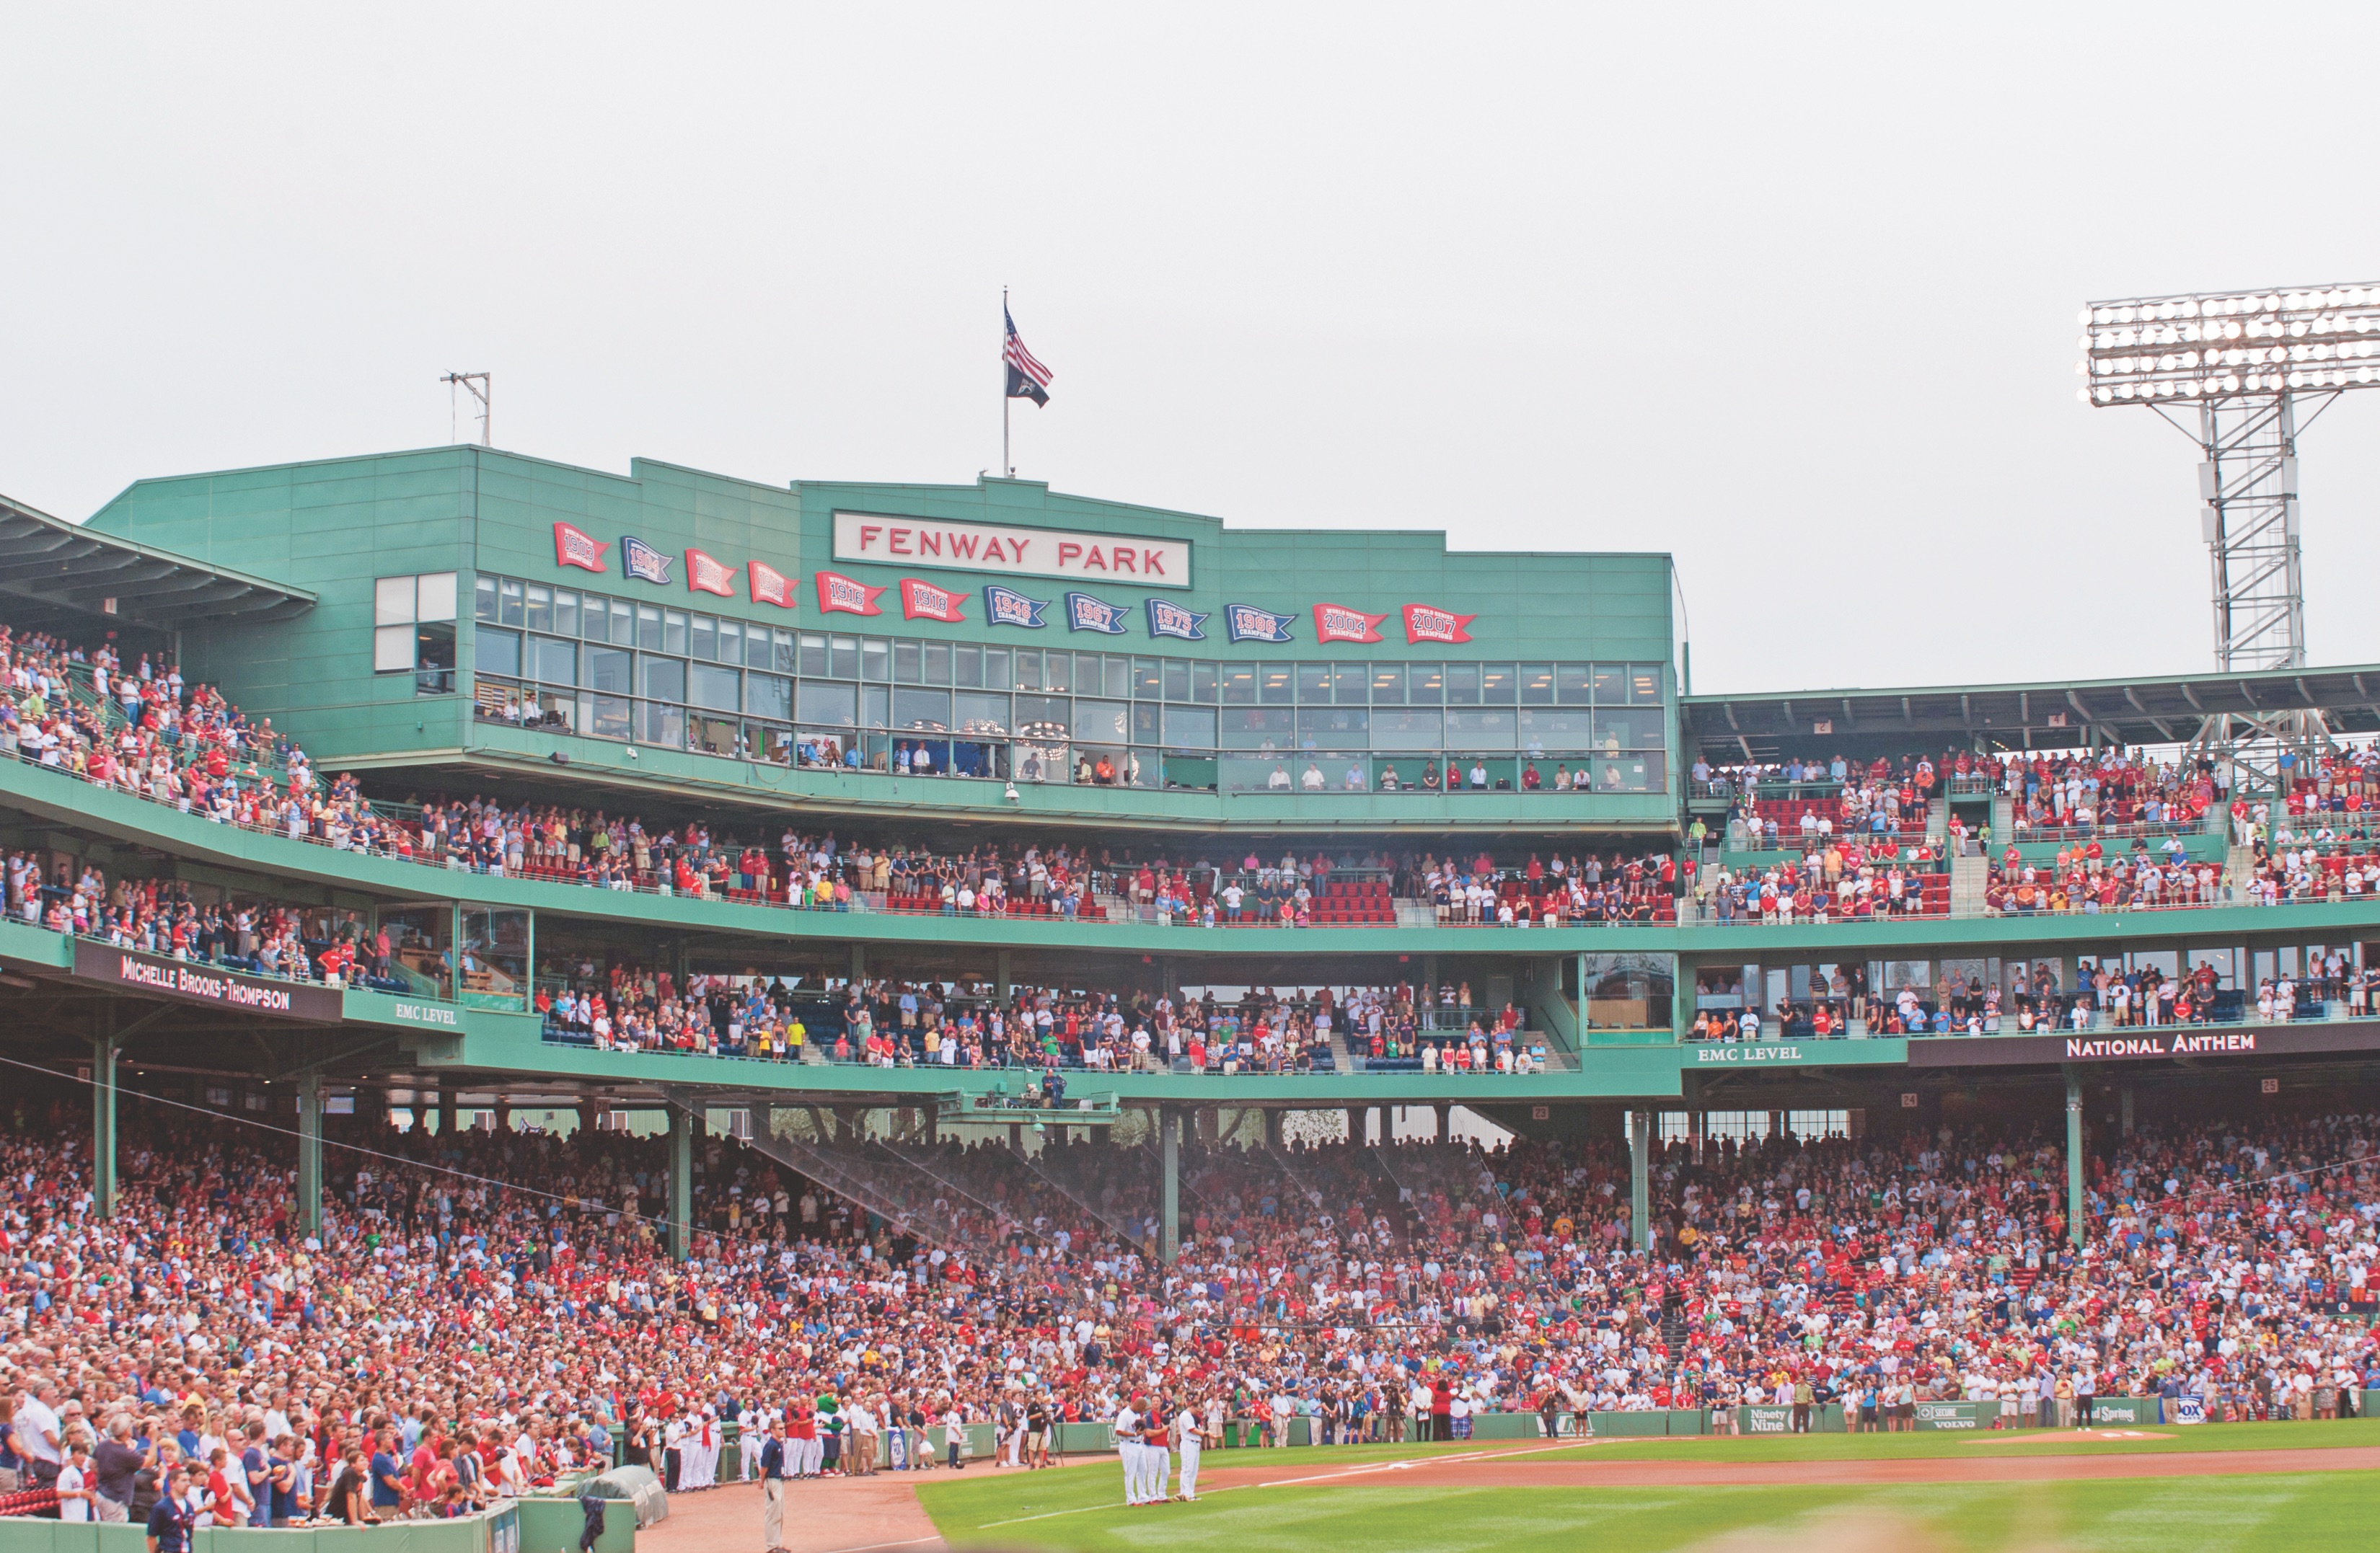 Boston’s Fenway Park Ghost Town’ video goes viral!